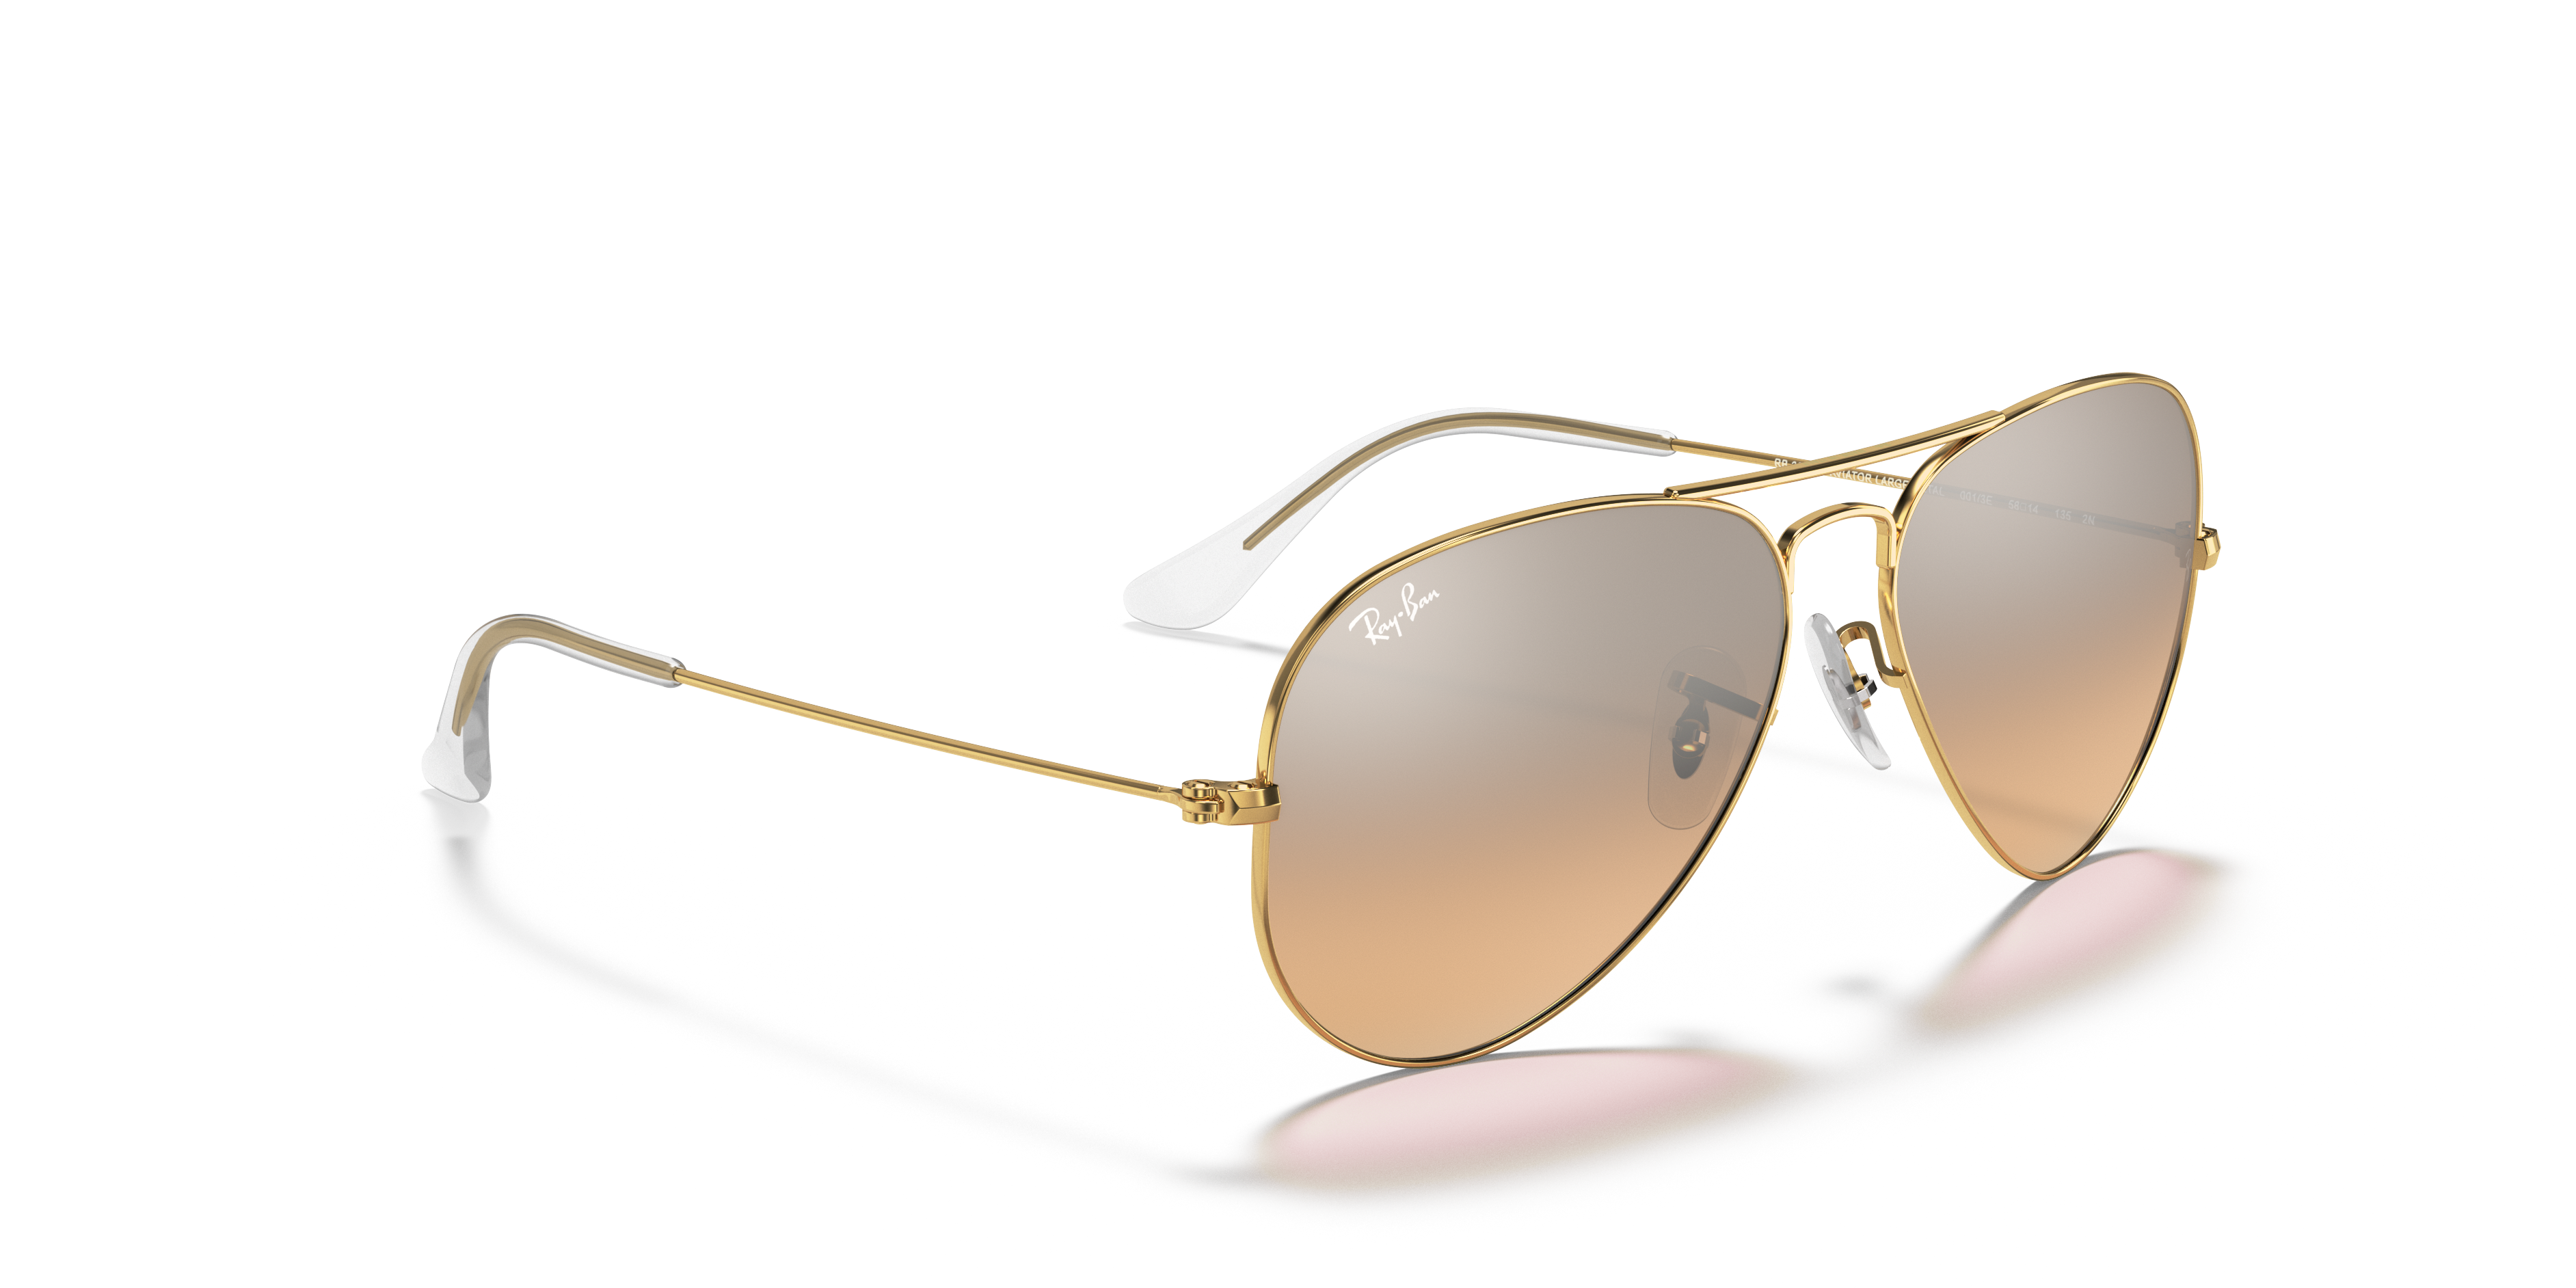 Angle_Right01 Ray-Ban Aviator RB 3025 Sunglasses Pink / Gold